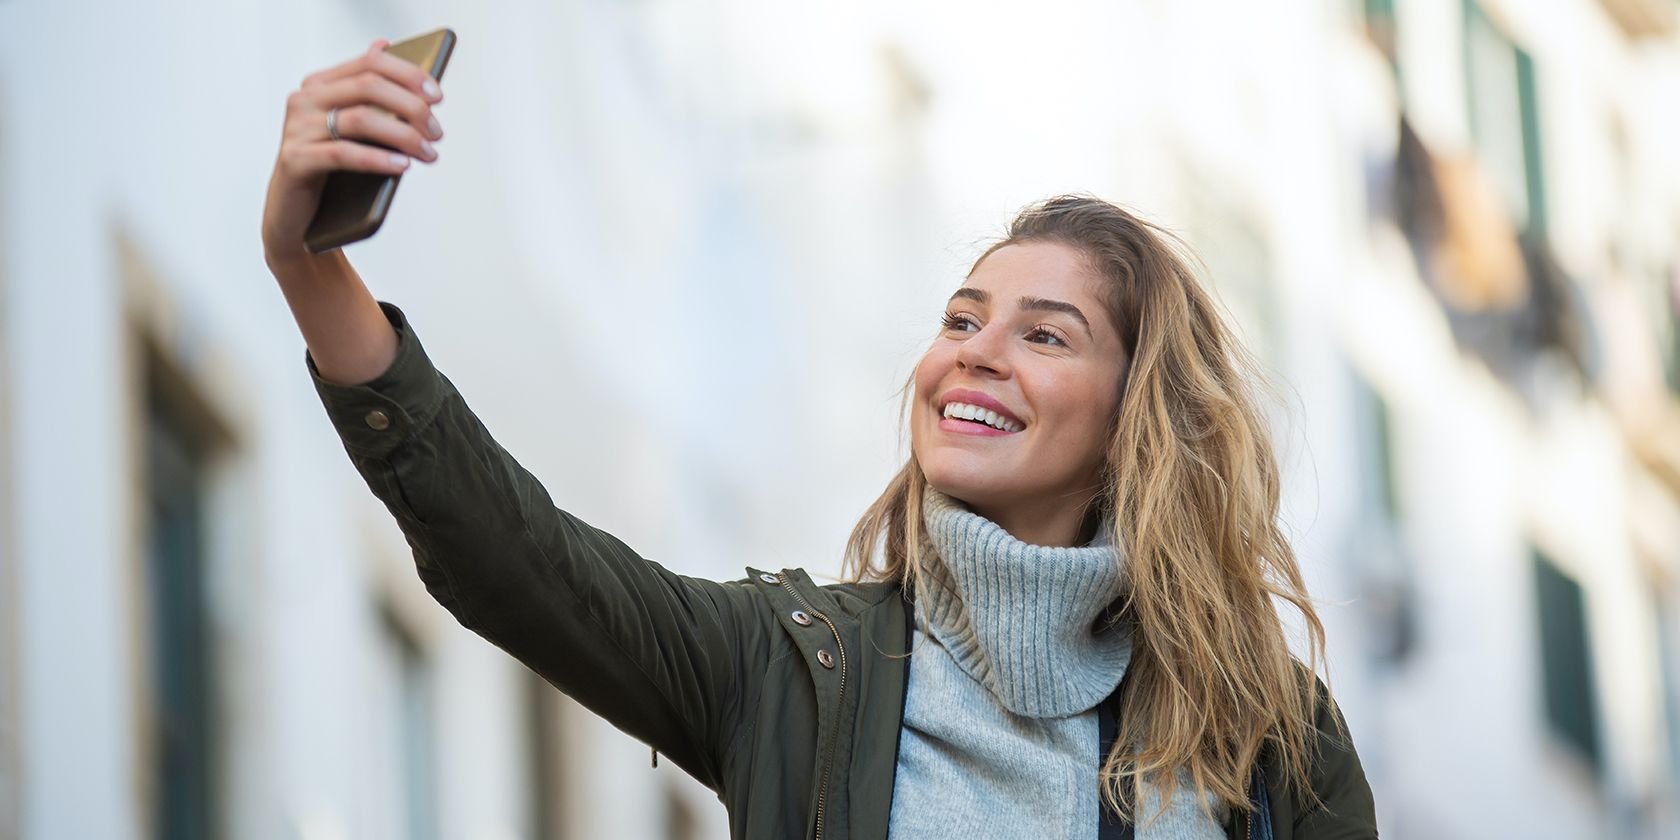 The 10 Best Face Filter Mobile Apps for Flawless Selfies